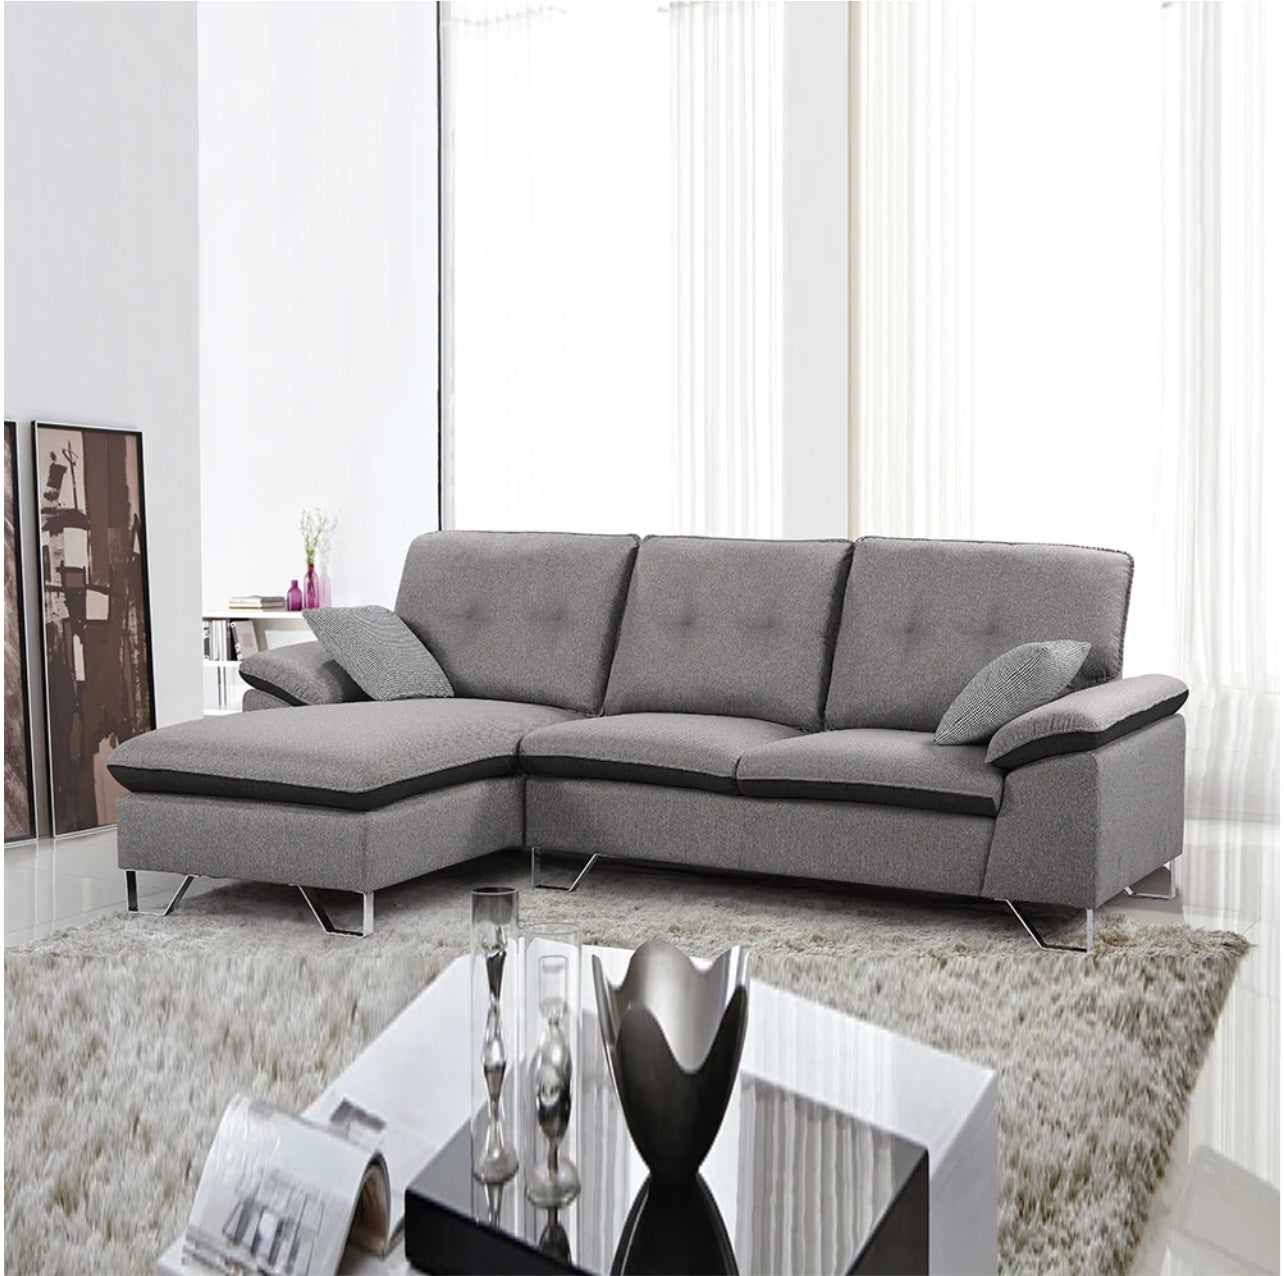 Buy Luxury Sofa Sets Online @Best Prices in India! | GKW Retail